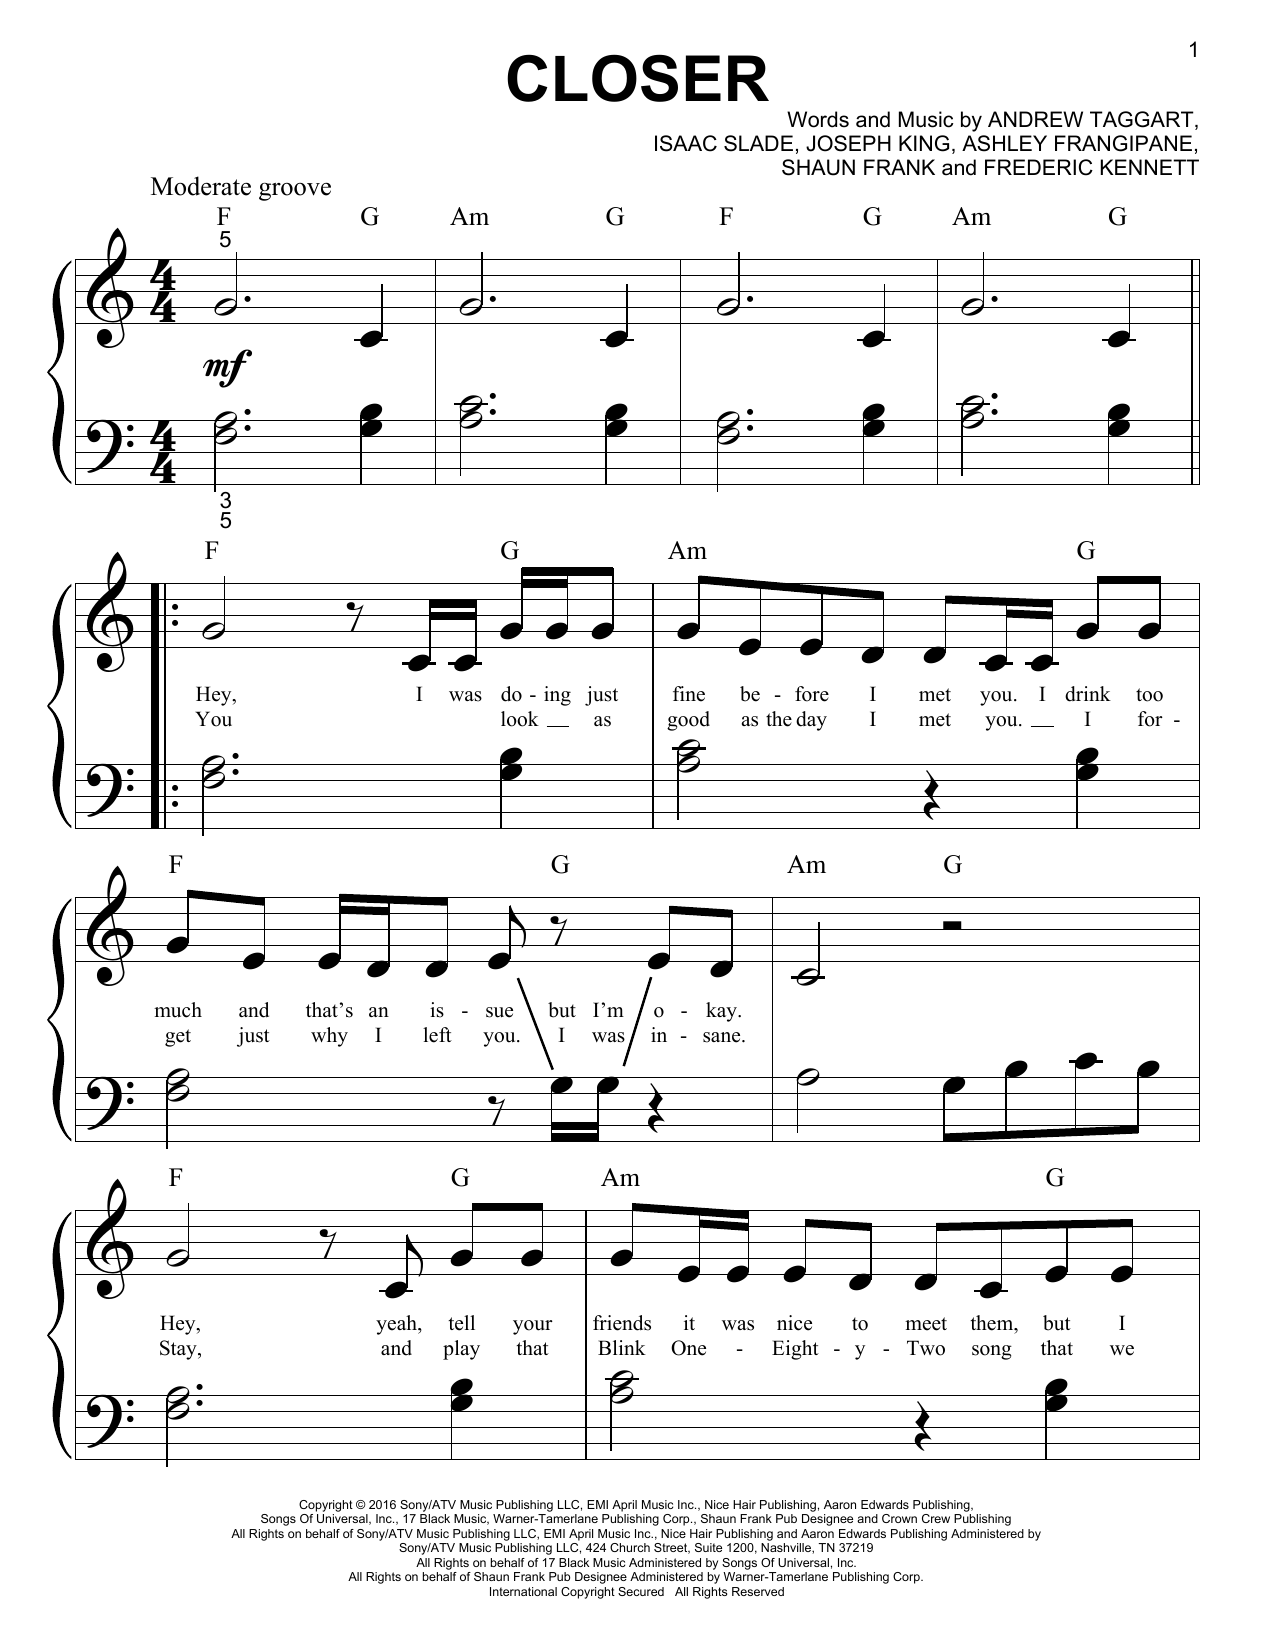 Download The Chainsmokers Closer (feat. Halsey) Sheet Music